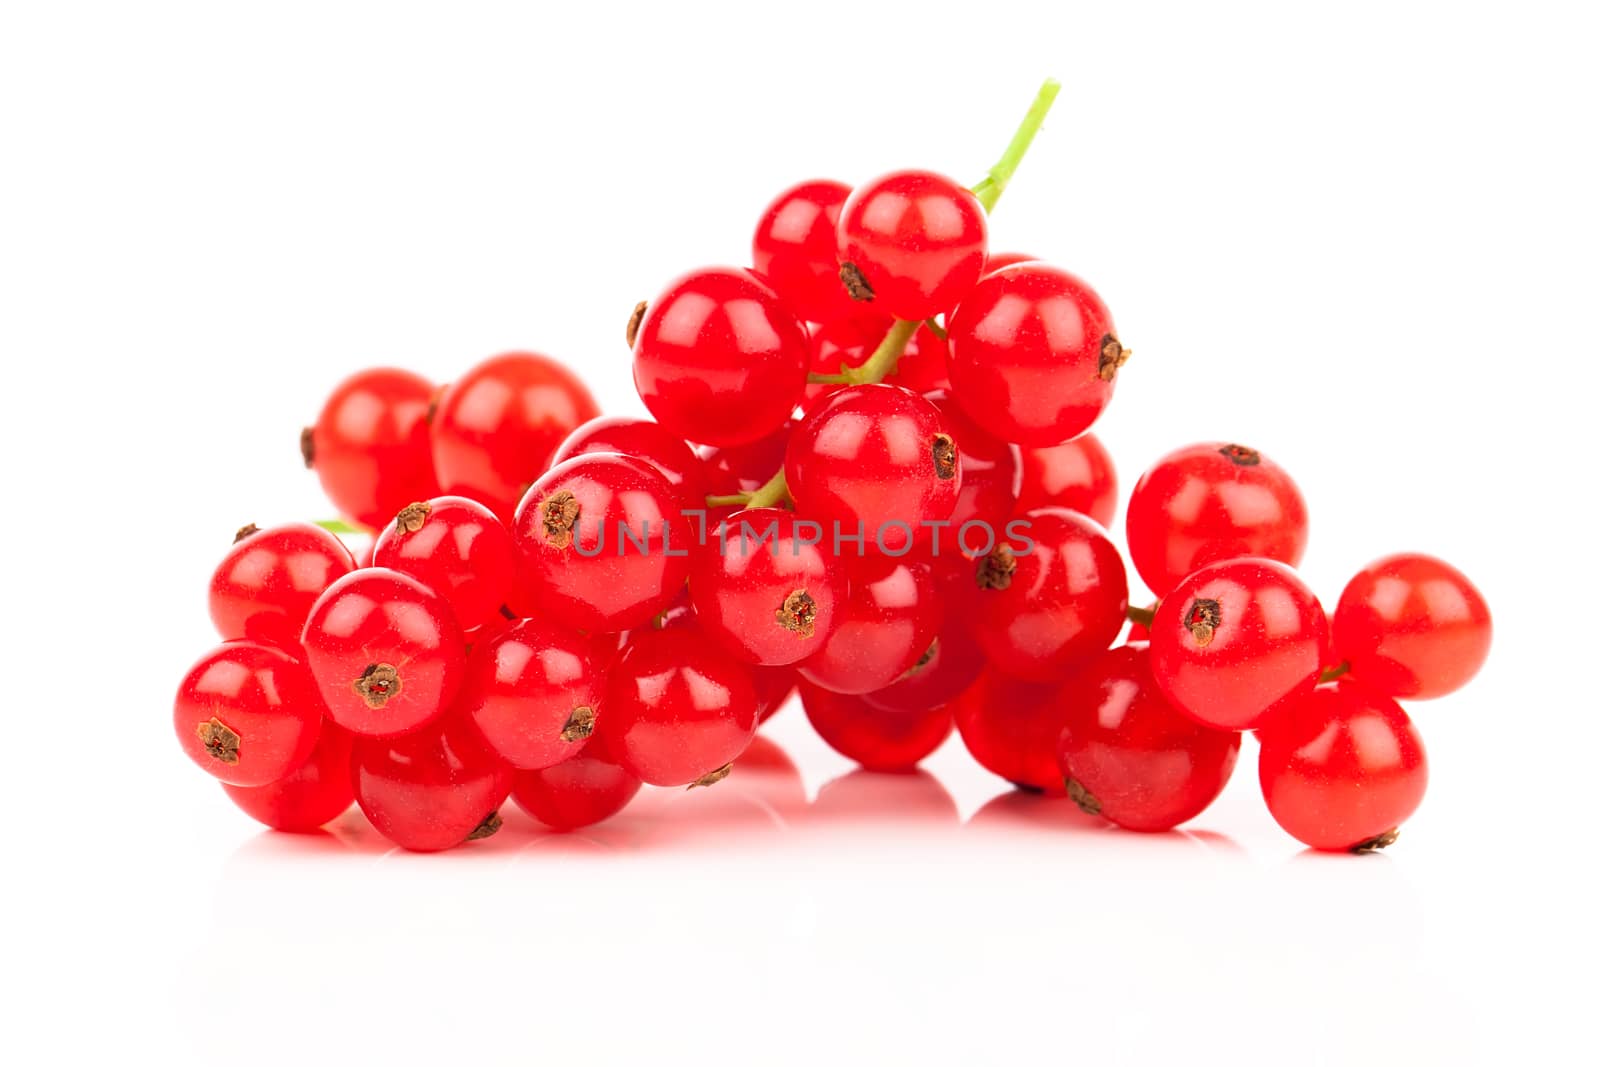 red currant on a white background
 by motorolka